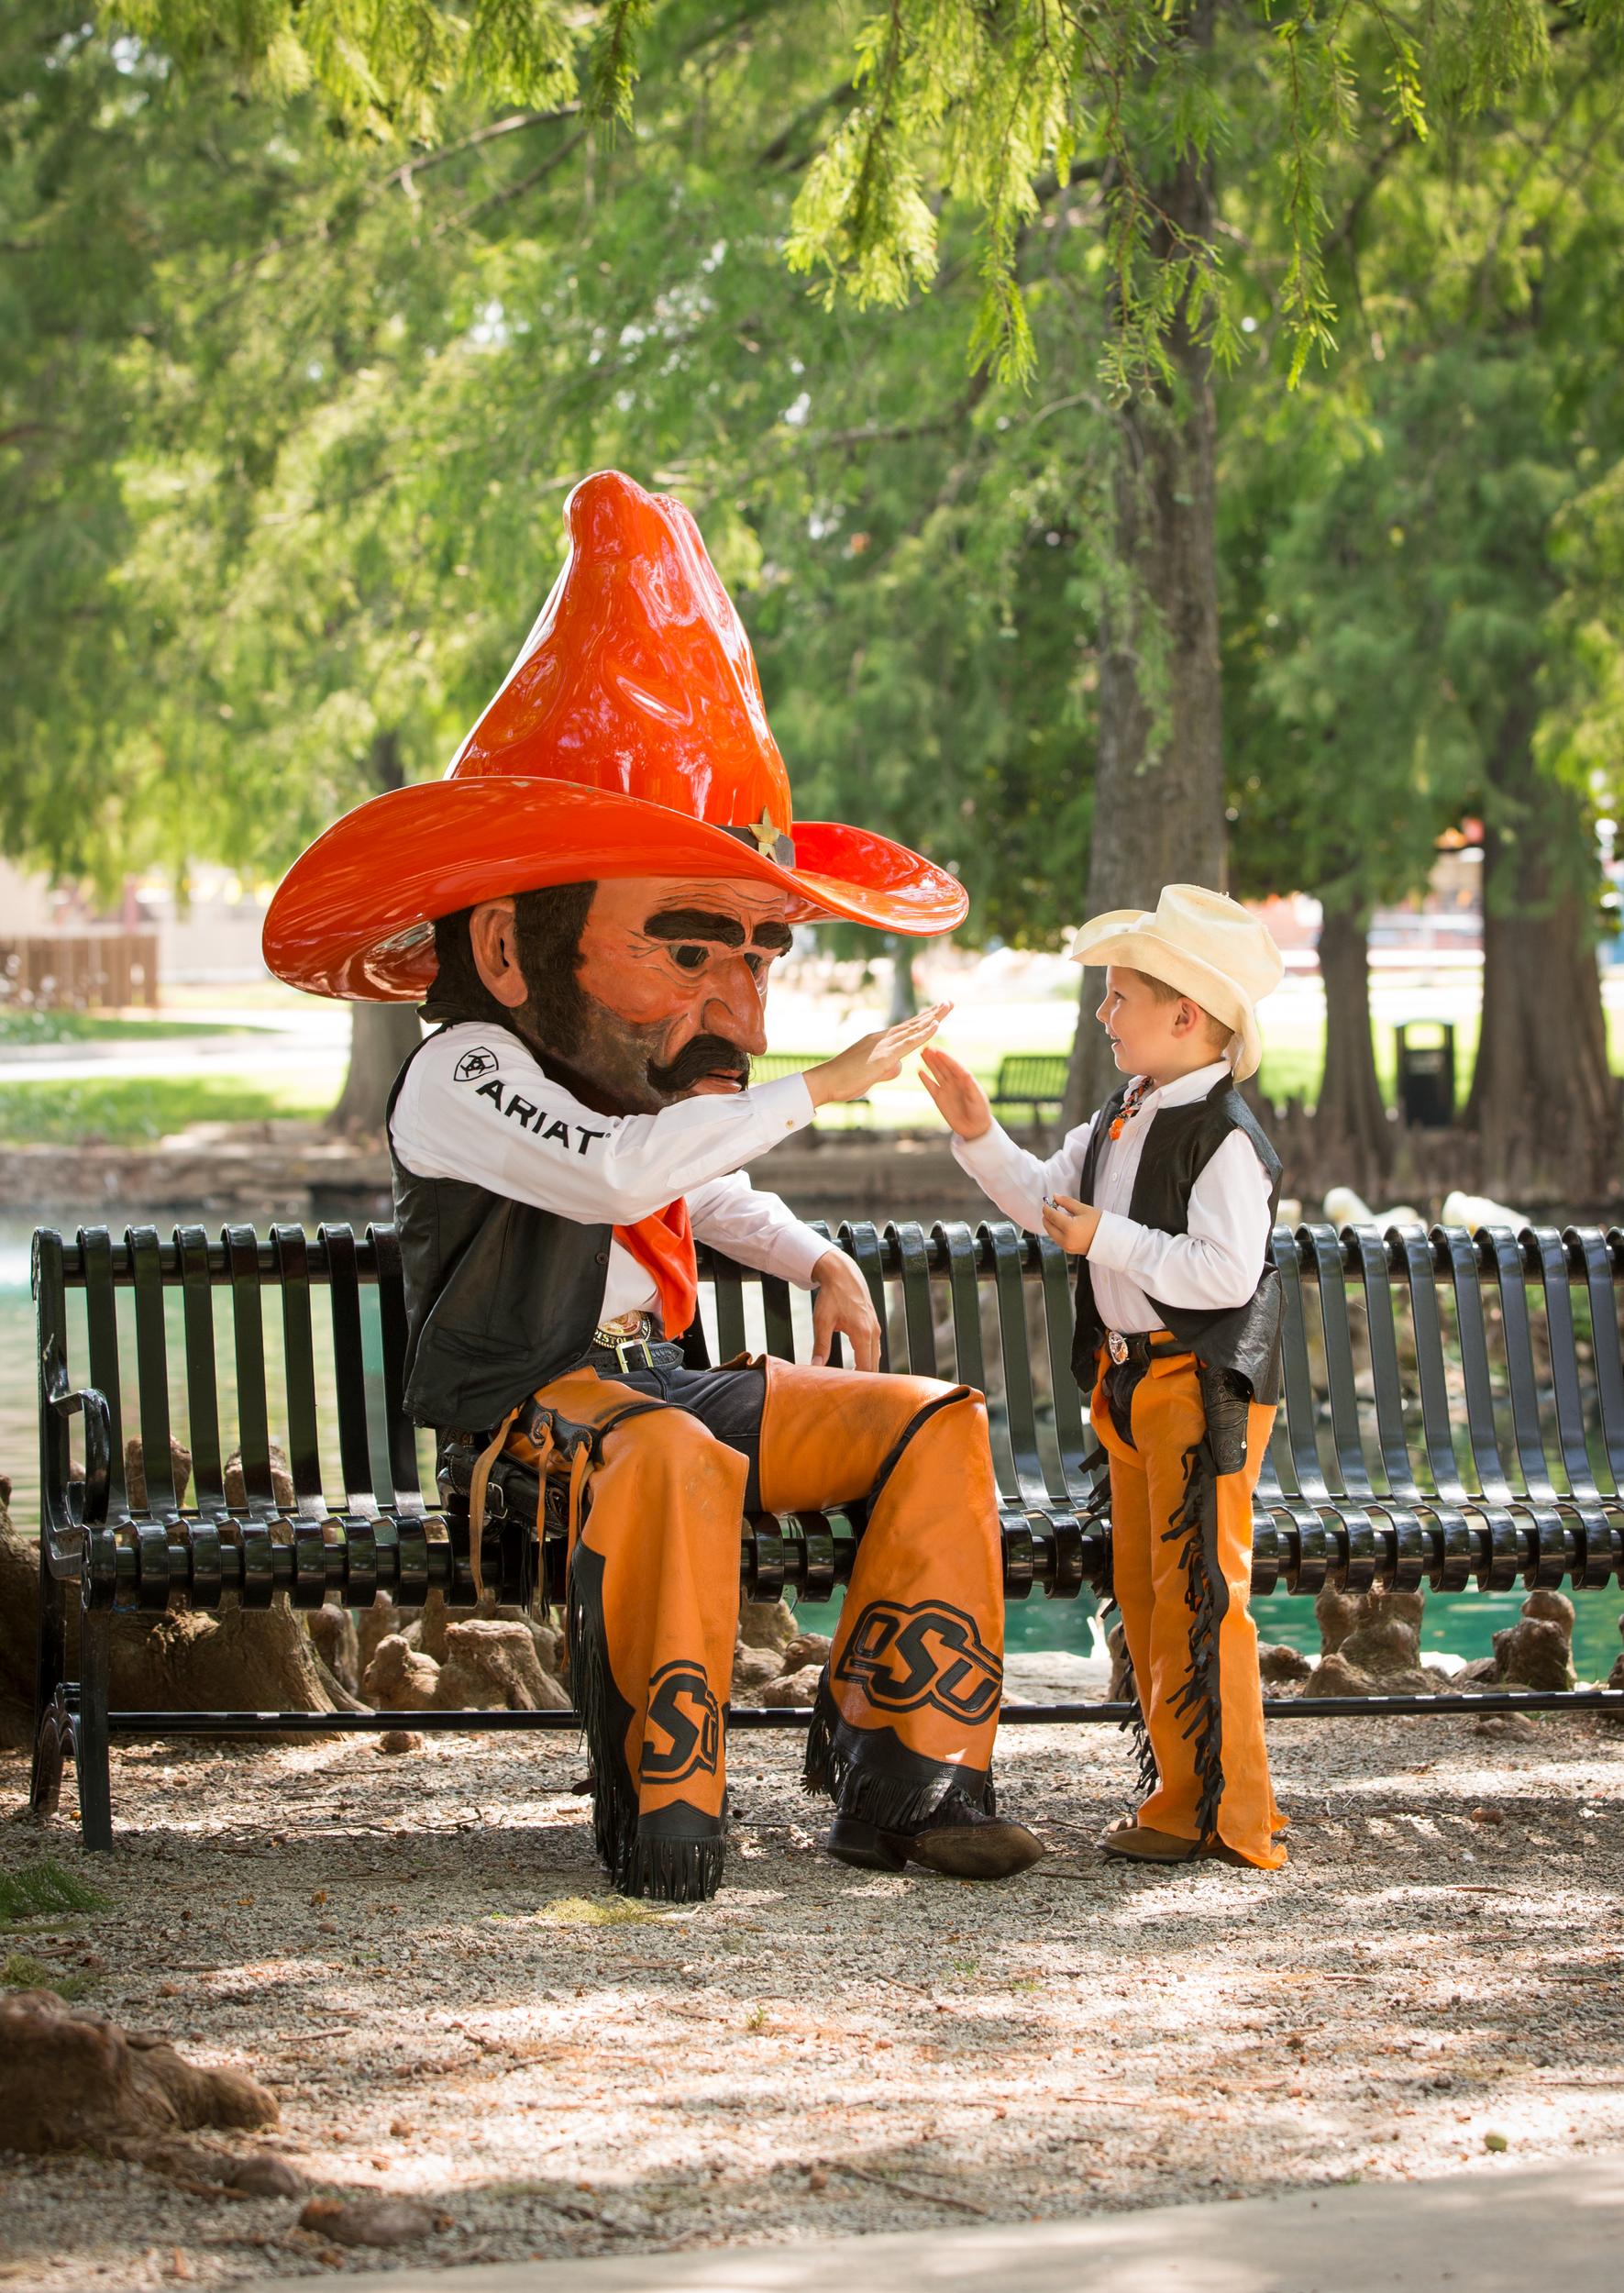 Pistol Pete sits on a bench near Theta pond while giving a young OSU fan dressed like him a high five.